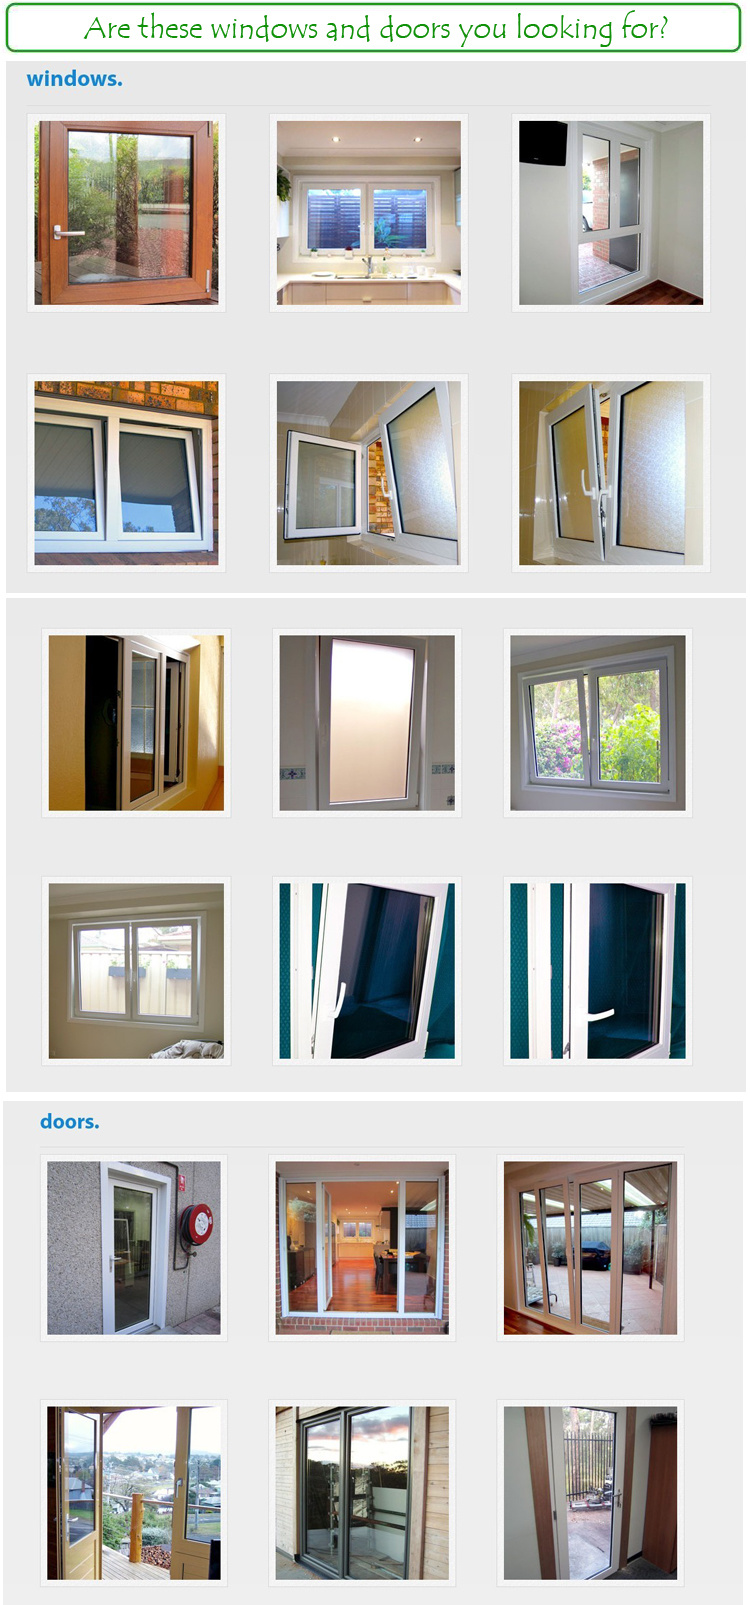 UPVC Profile Doors with Frames From Direct Supplier